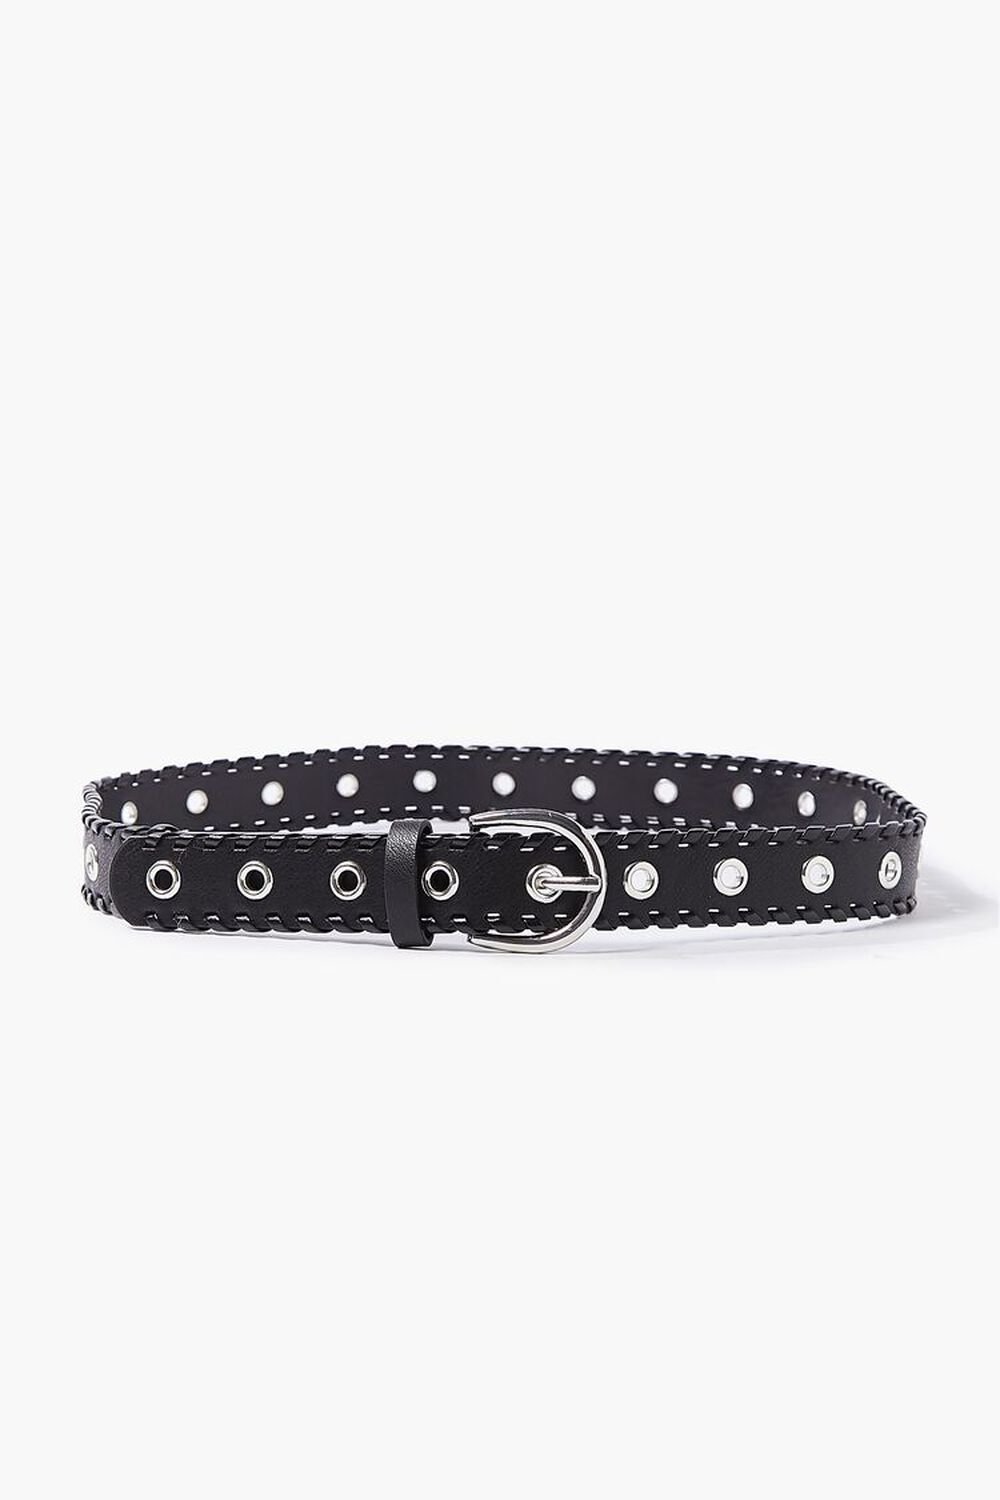 BLACK/SILVER Whipstitched Faux Leather Grommet Belt, image 1